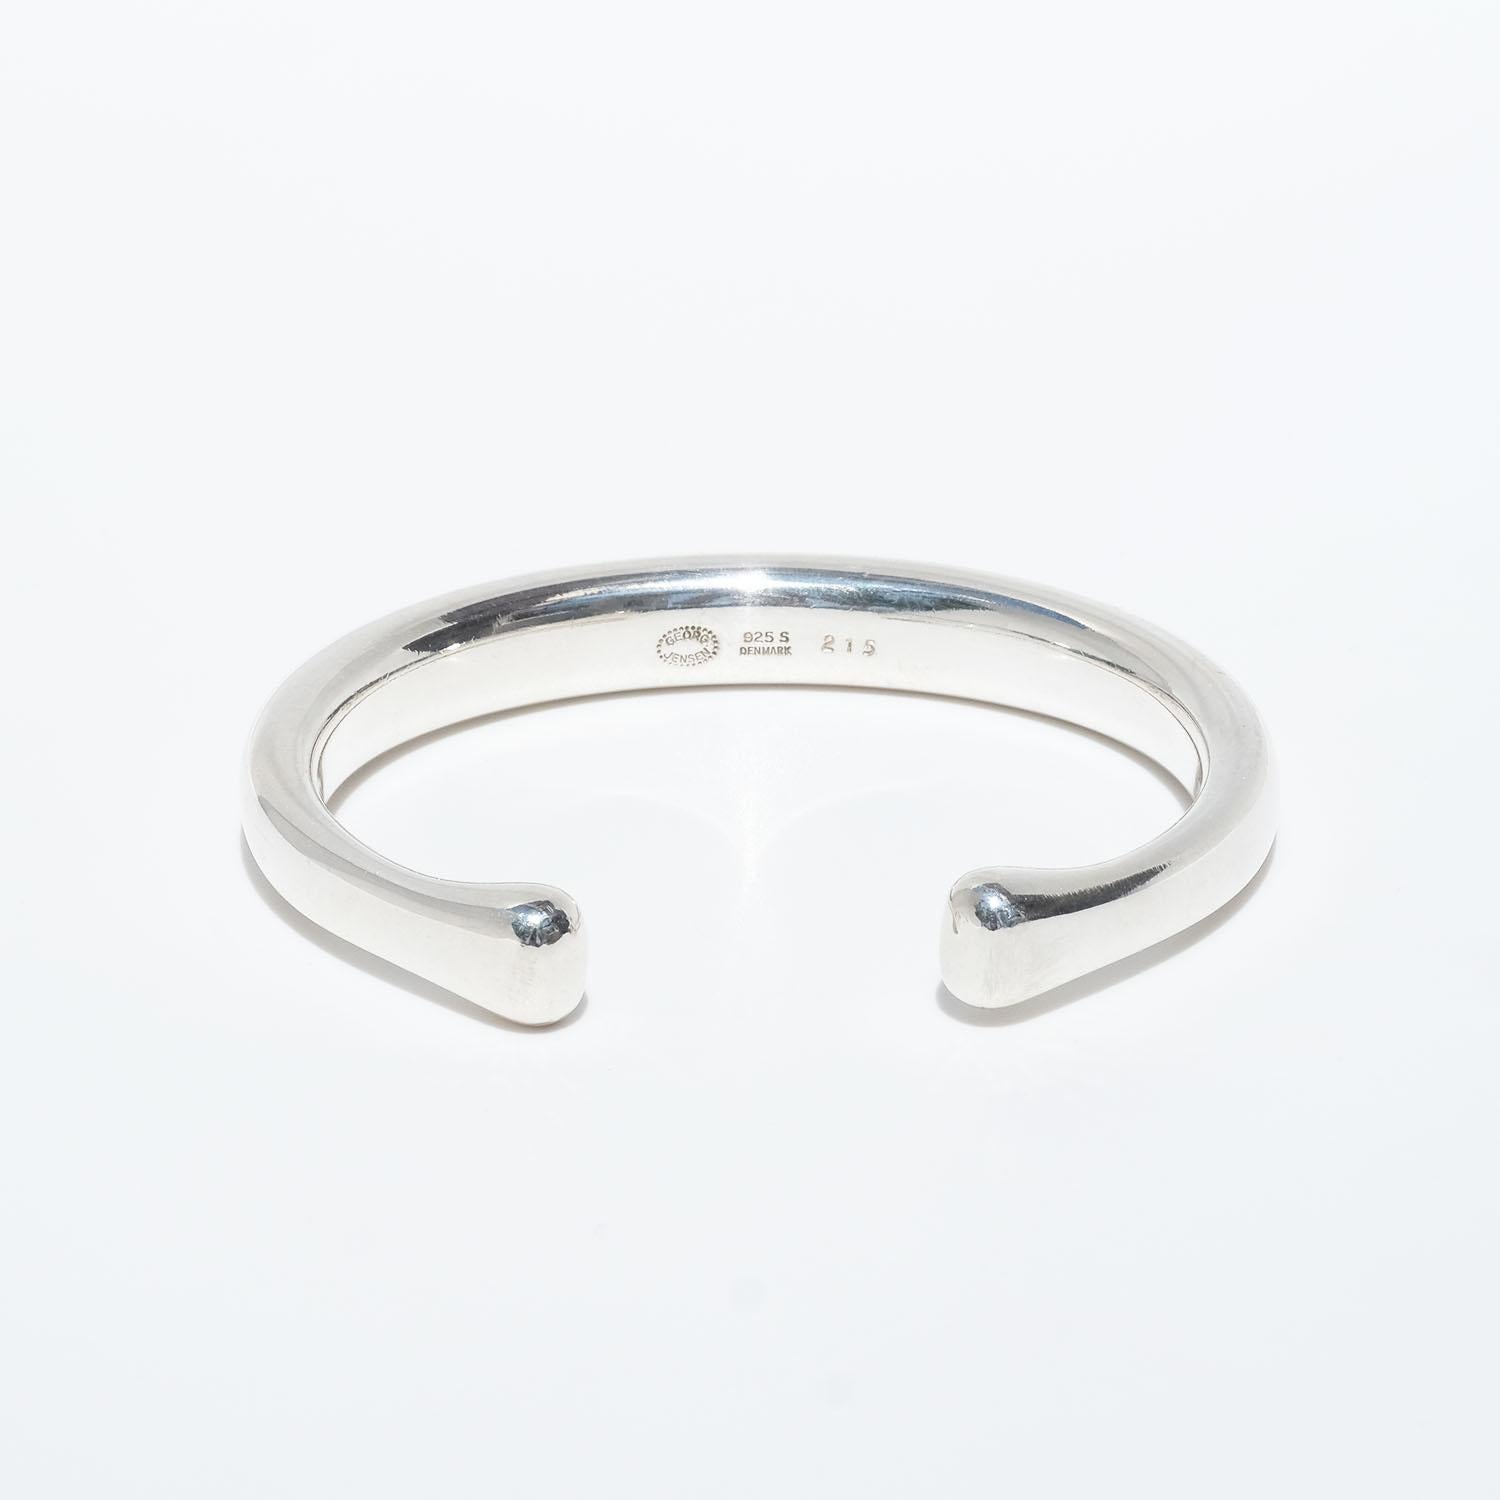 This sterling silver cuff bracelet has a glossy surface and geometrically curved arms. Its endings have a soft shape which gives the bracelet a classic touch.

The bracelet will fit well both in an everyday environment as well as in a more festive